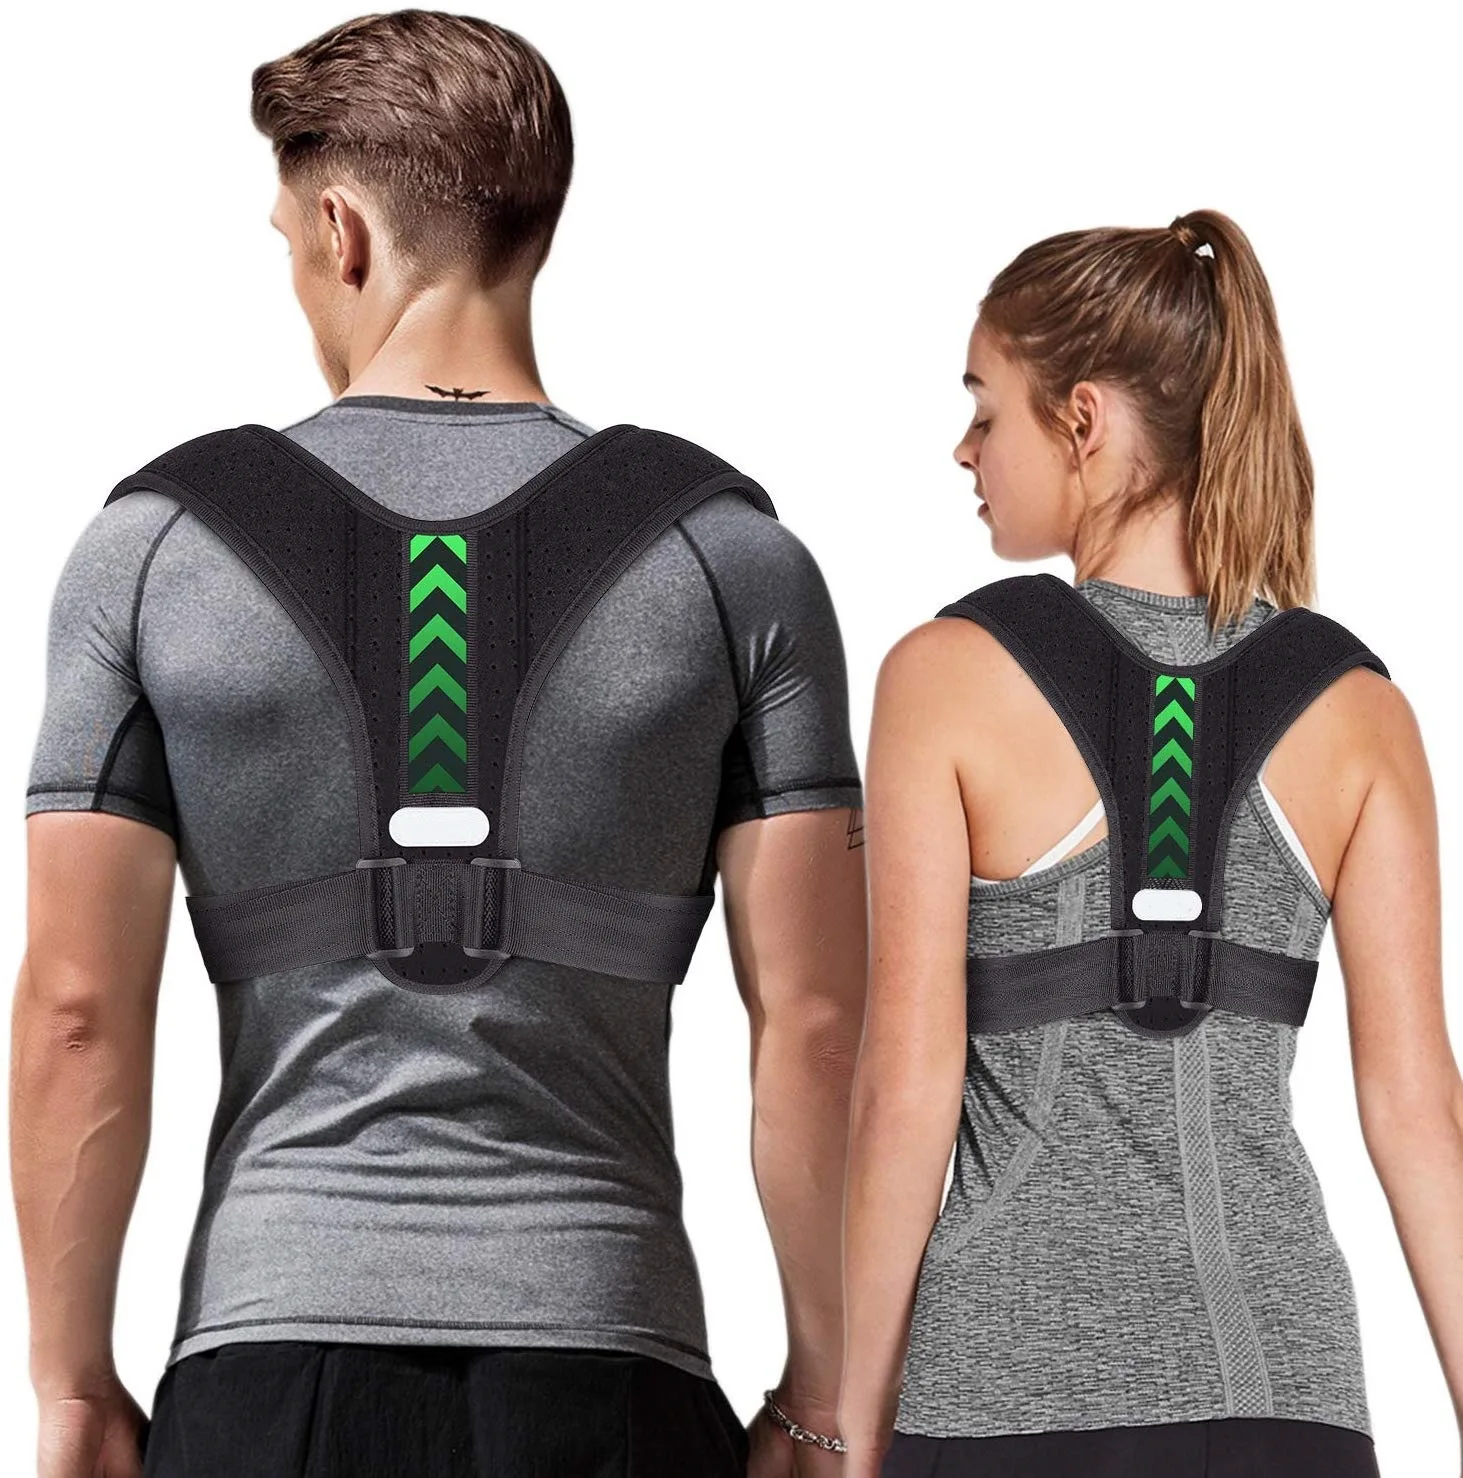 

Hot Selling Updated 2021 Version Perfect Adjustable Posture Corrector for Men and Women Upper Back Brace for Clavicle Support, Black